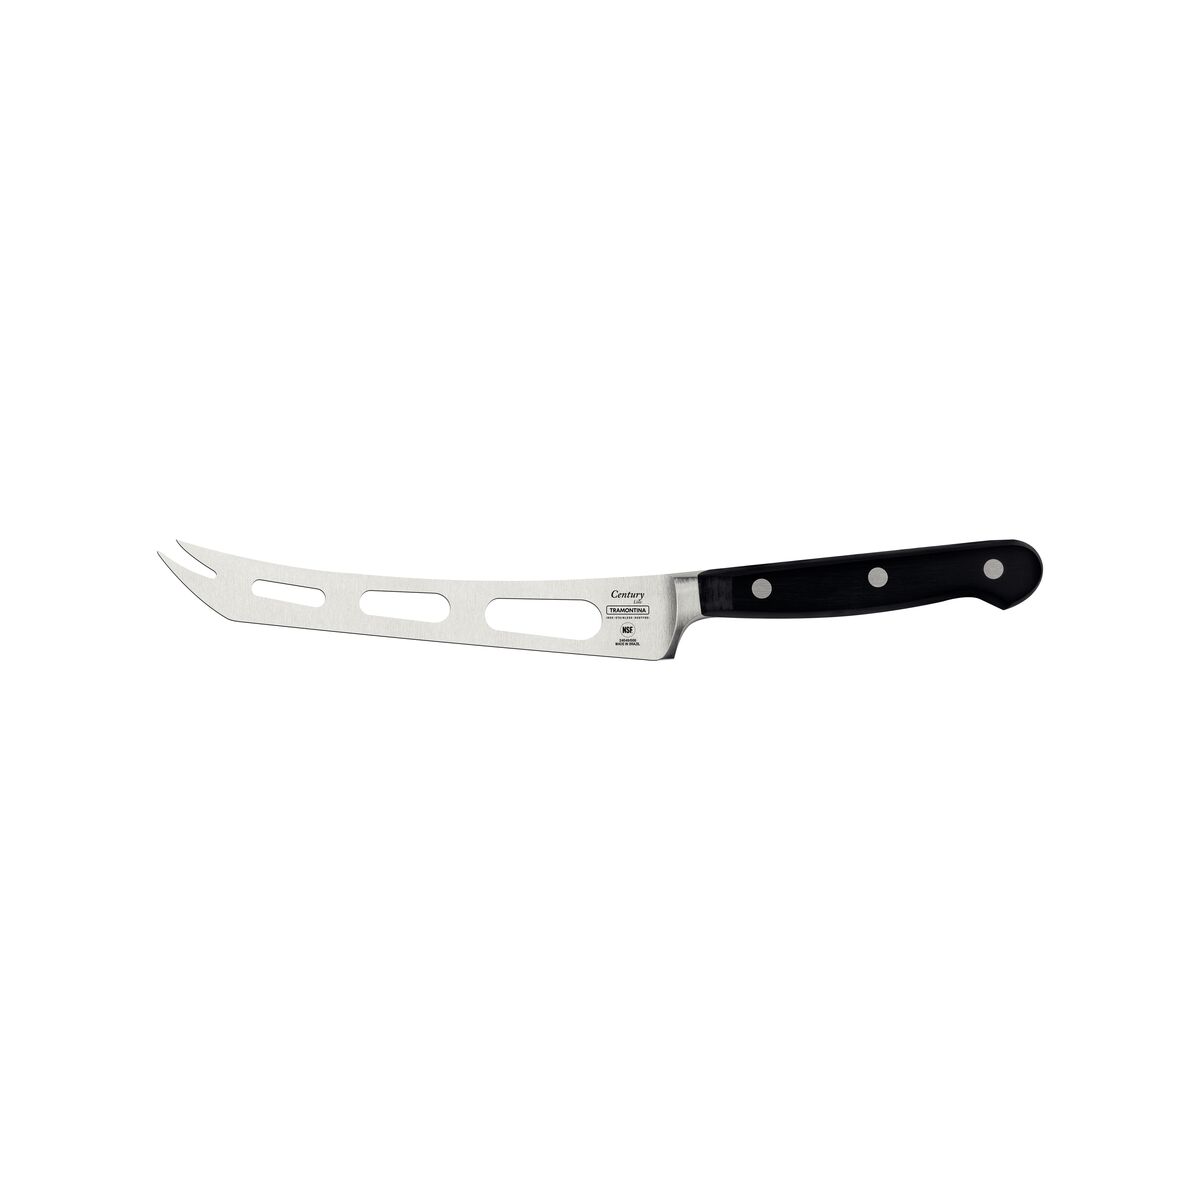 Tramontina Century 6" Cheese knife with Stainless-Steel Blade and Black Polycarbonate Handle